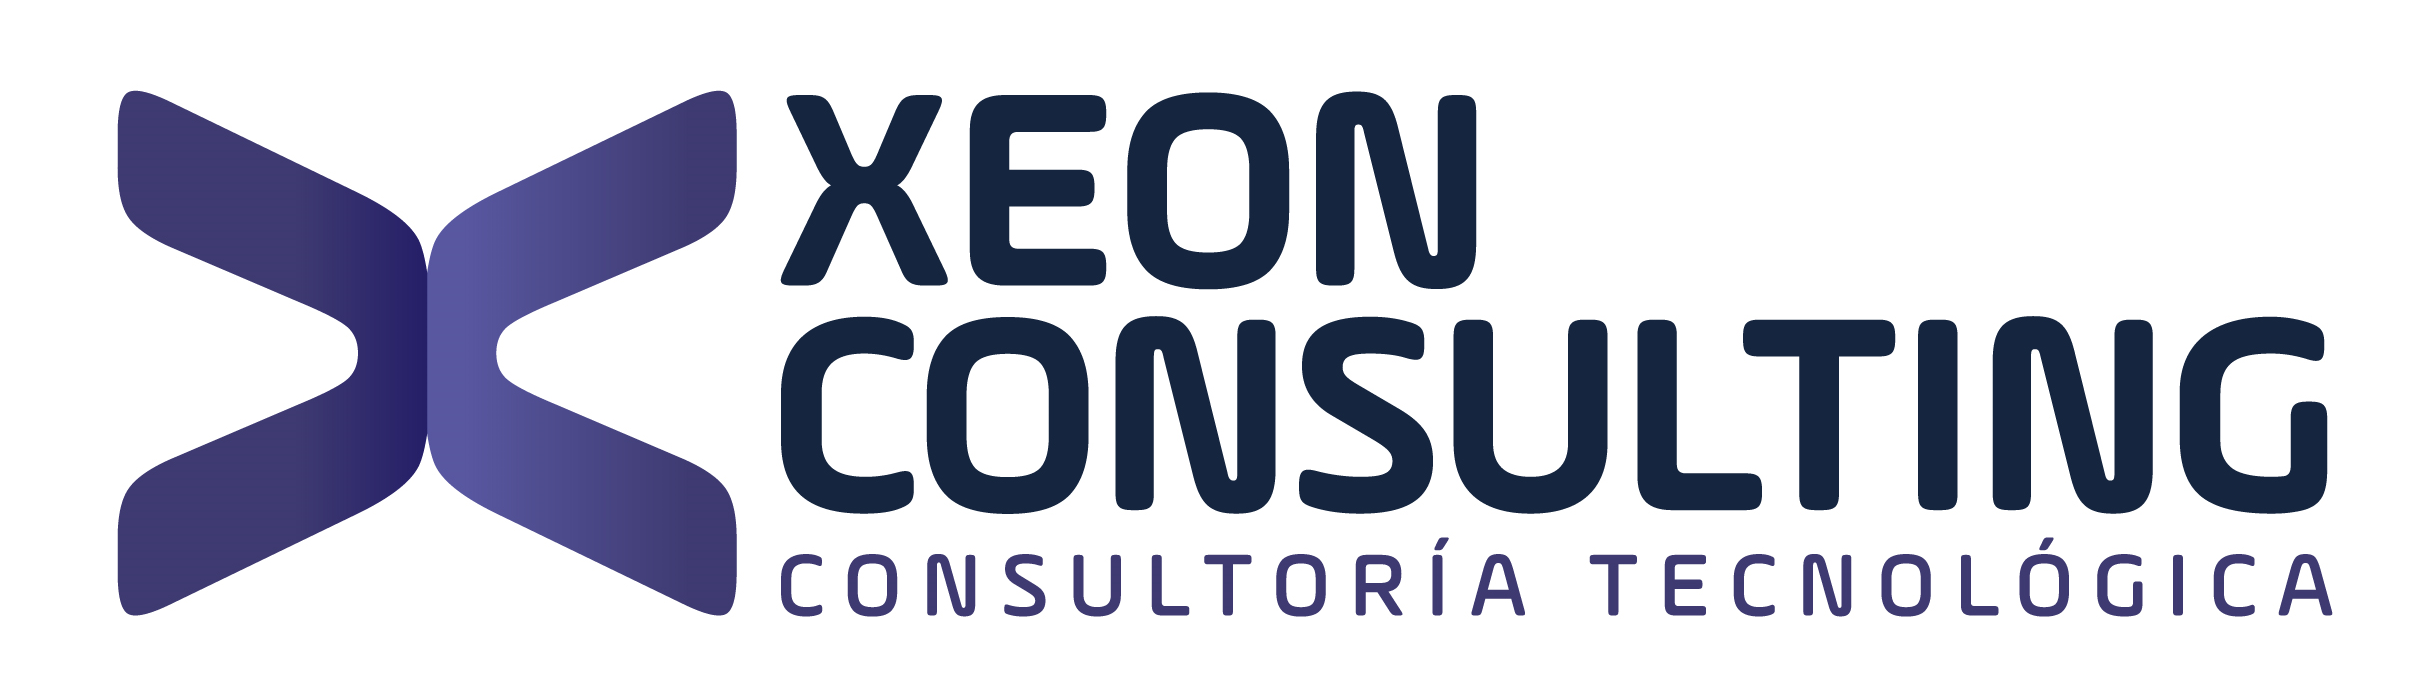 XEON Consulting